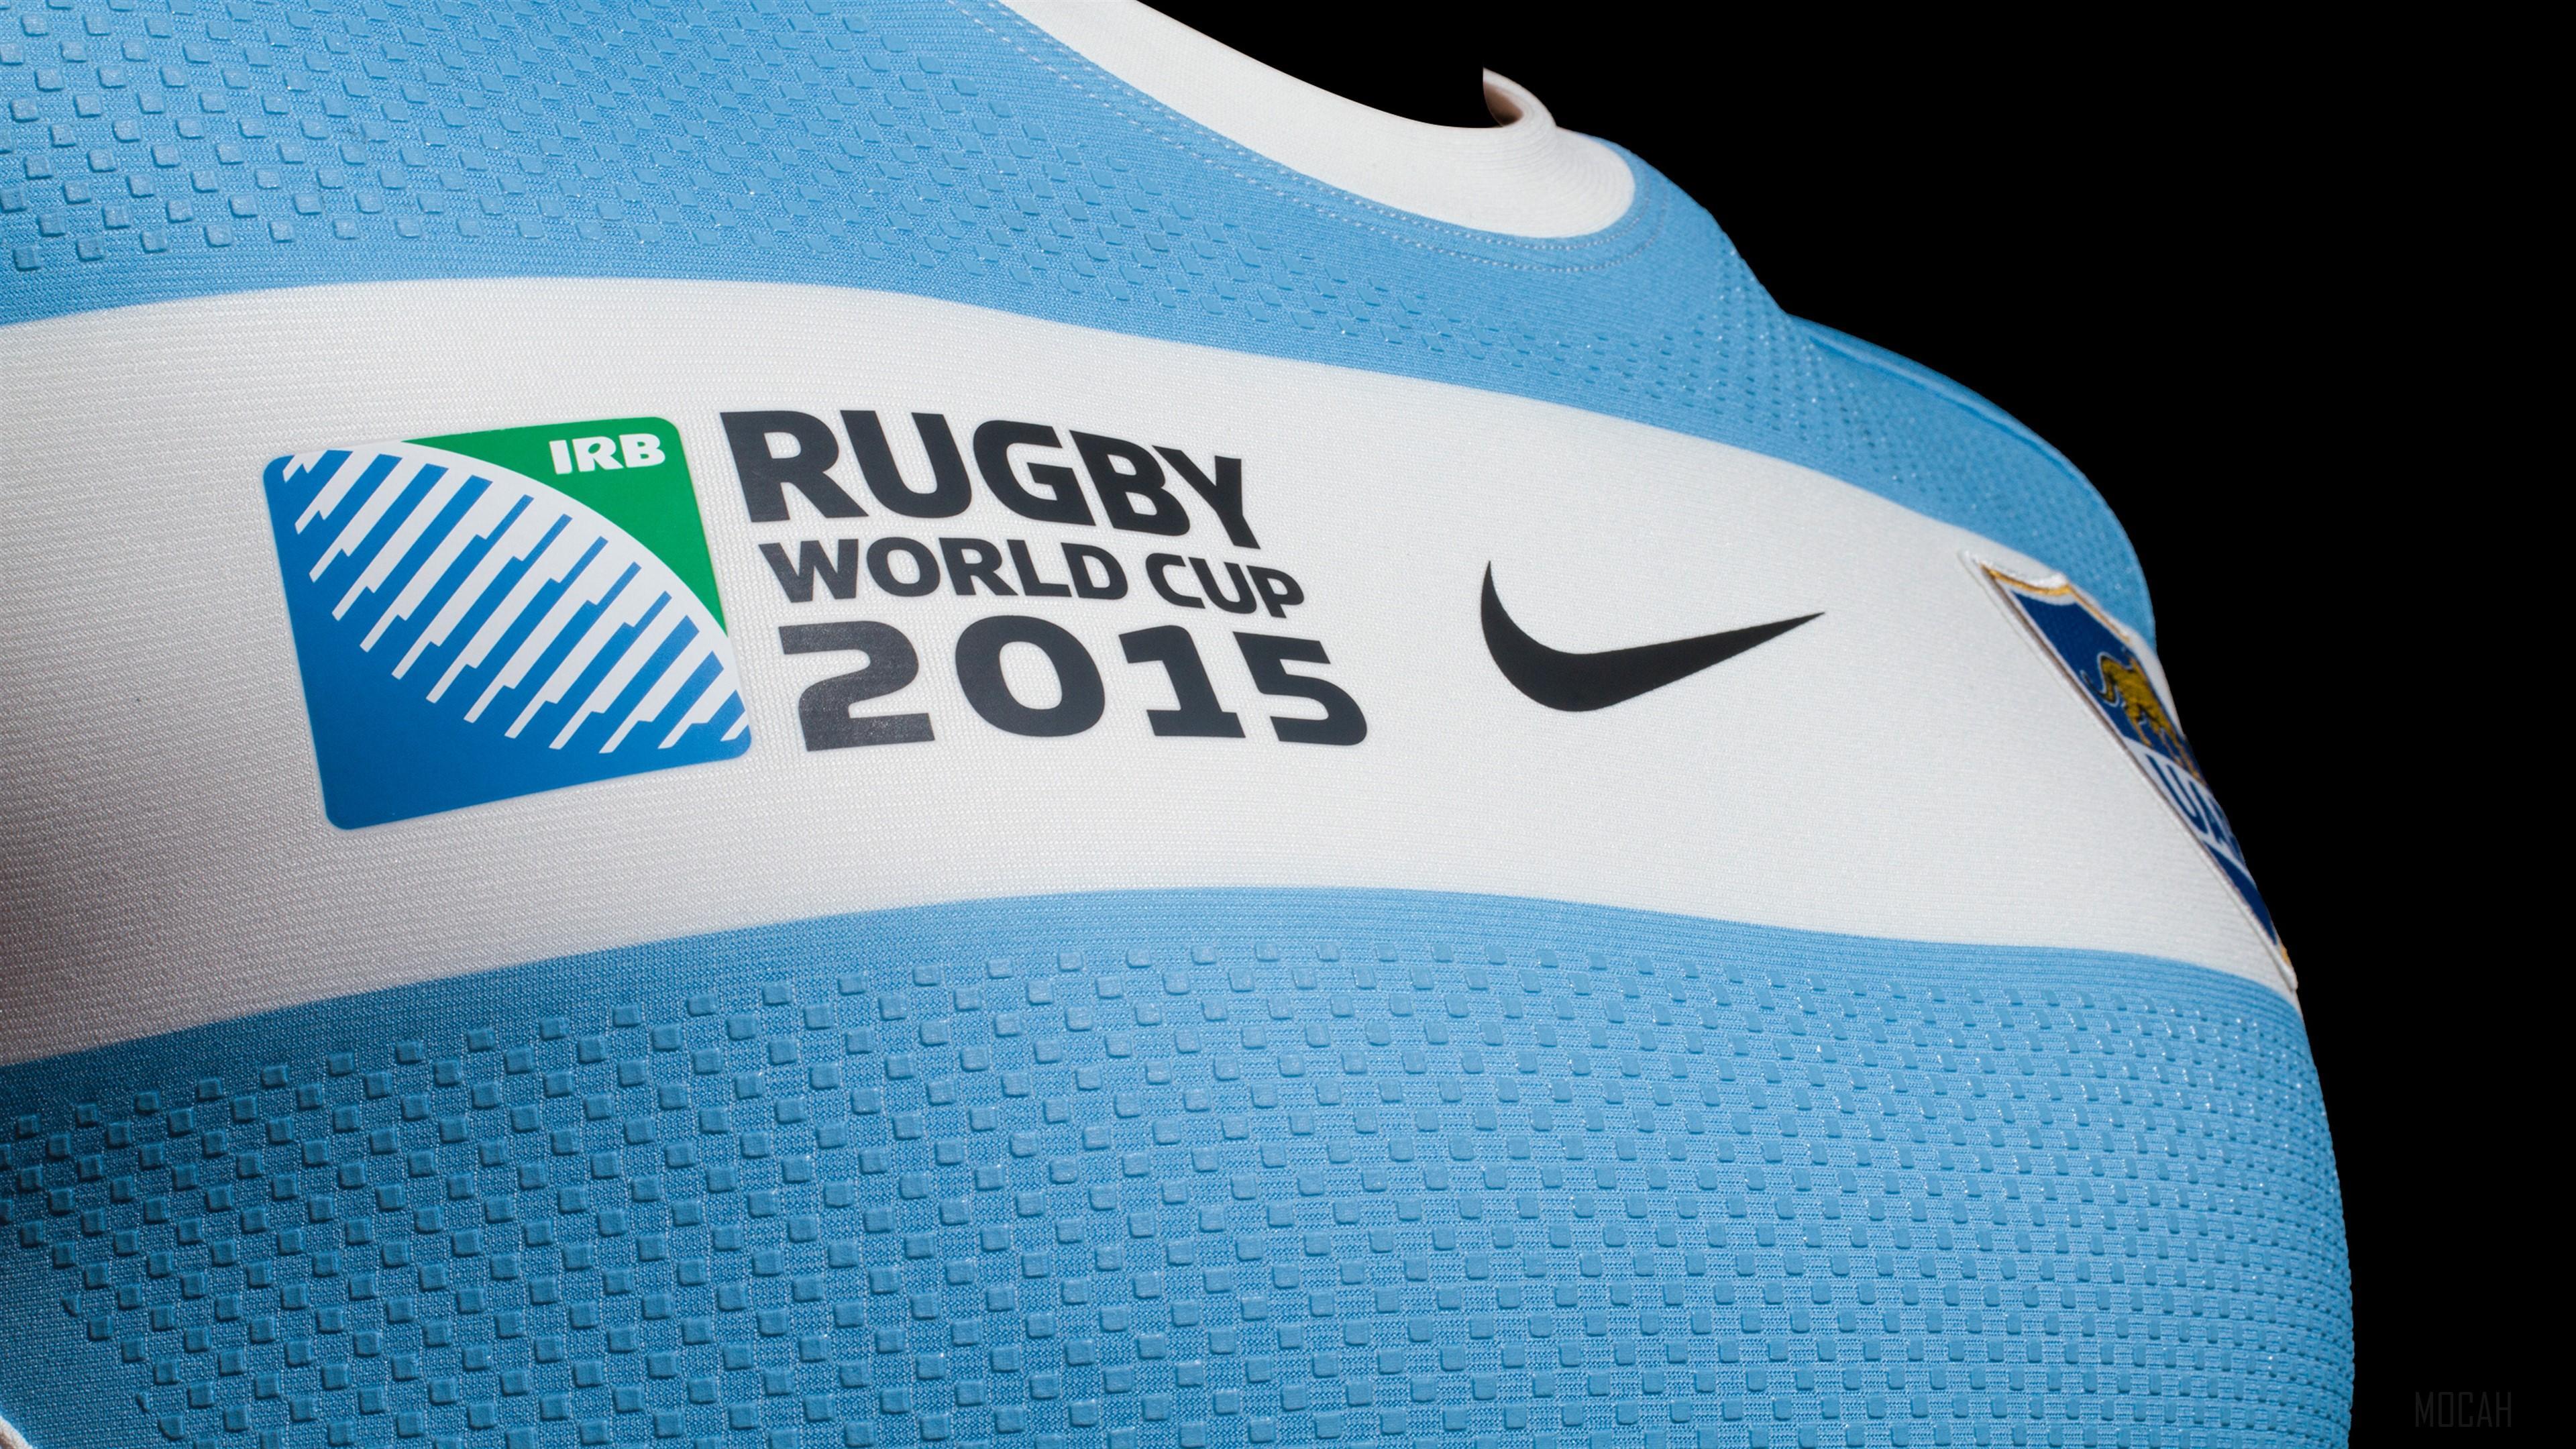 HD wallpaper, Argentina Pumas Nike Rugby World Cup 2015 4K